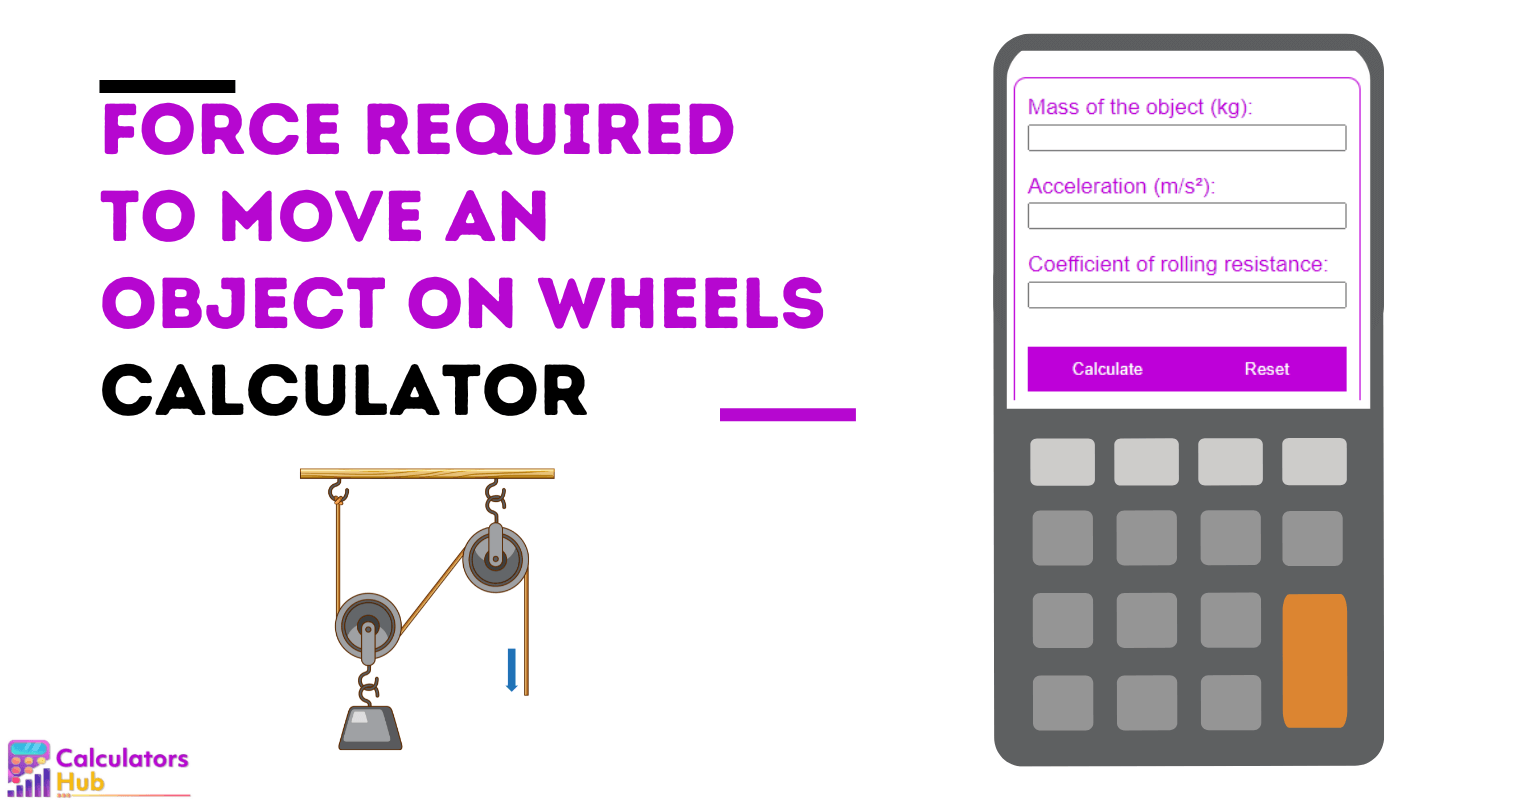 Force Required to Move an Object on Wheels Calculator